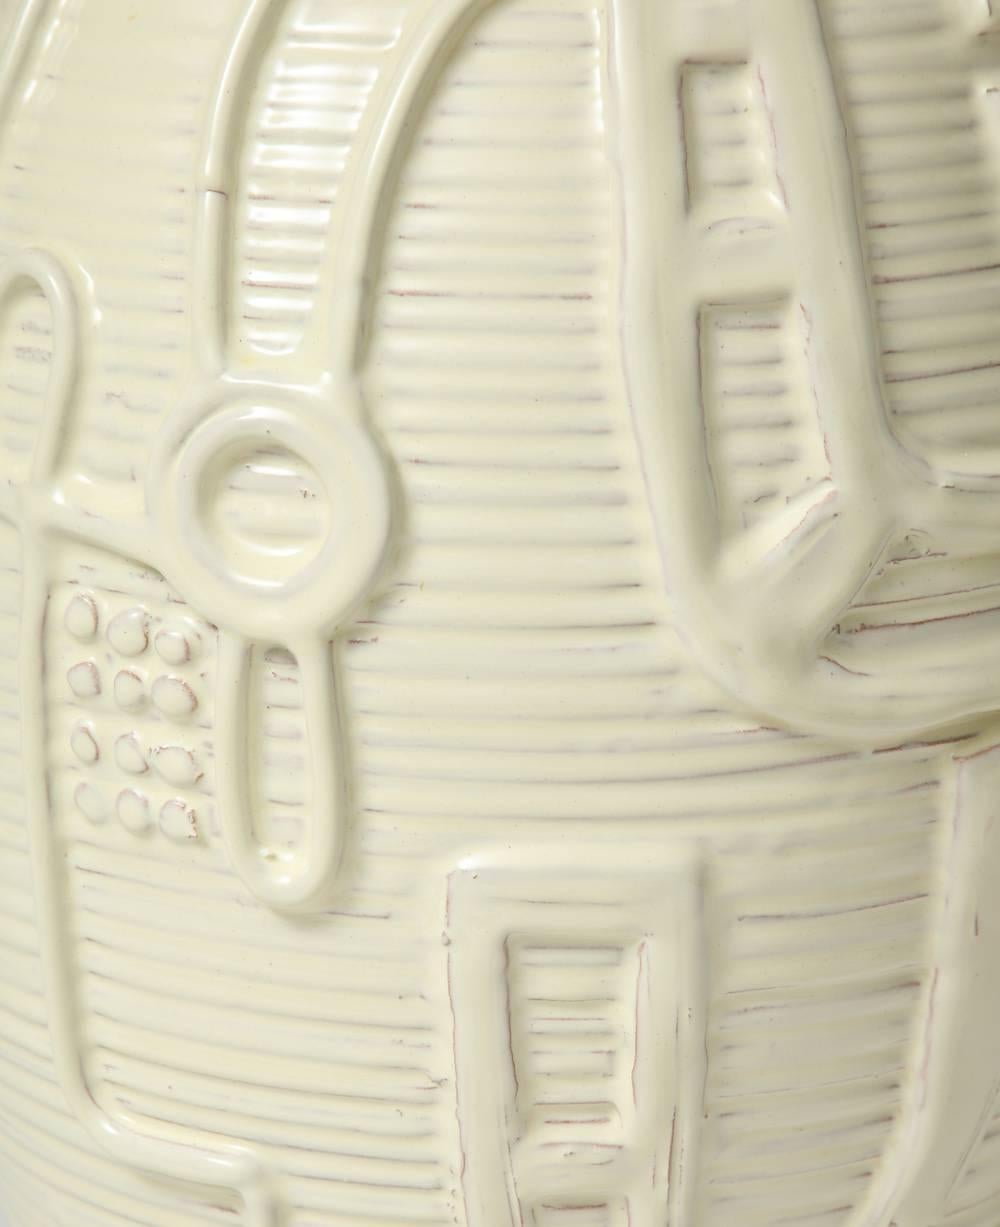 Large-scale ceramic bottle by Duca di Camastra.
Beautiful and large terra cotta bottle form with incised lines and hand-applied decoration. Creamy-white glaze, and signed on underside.